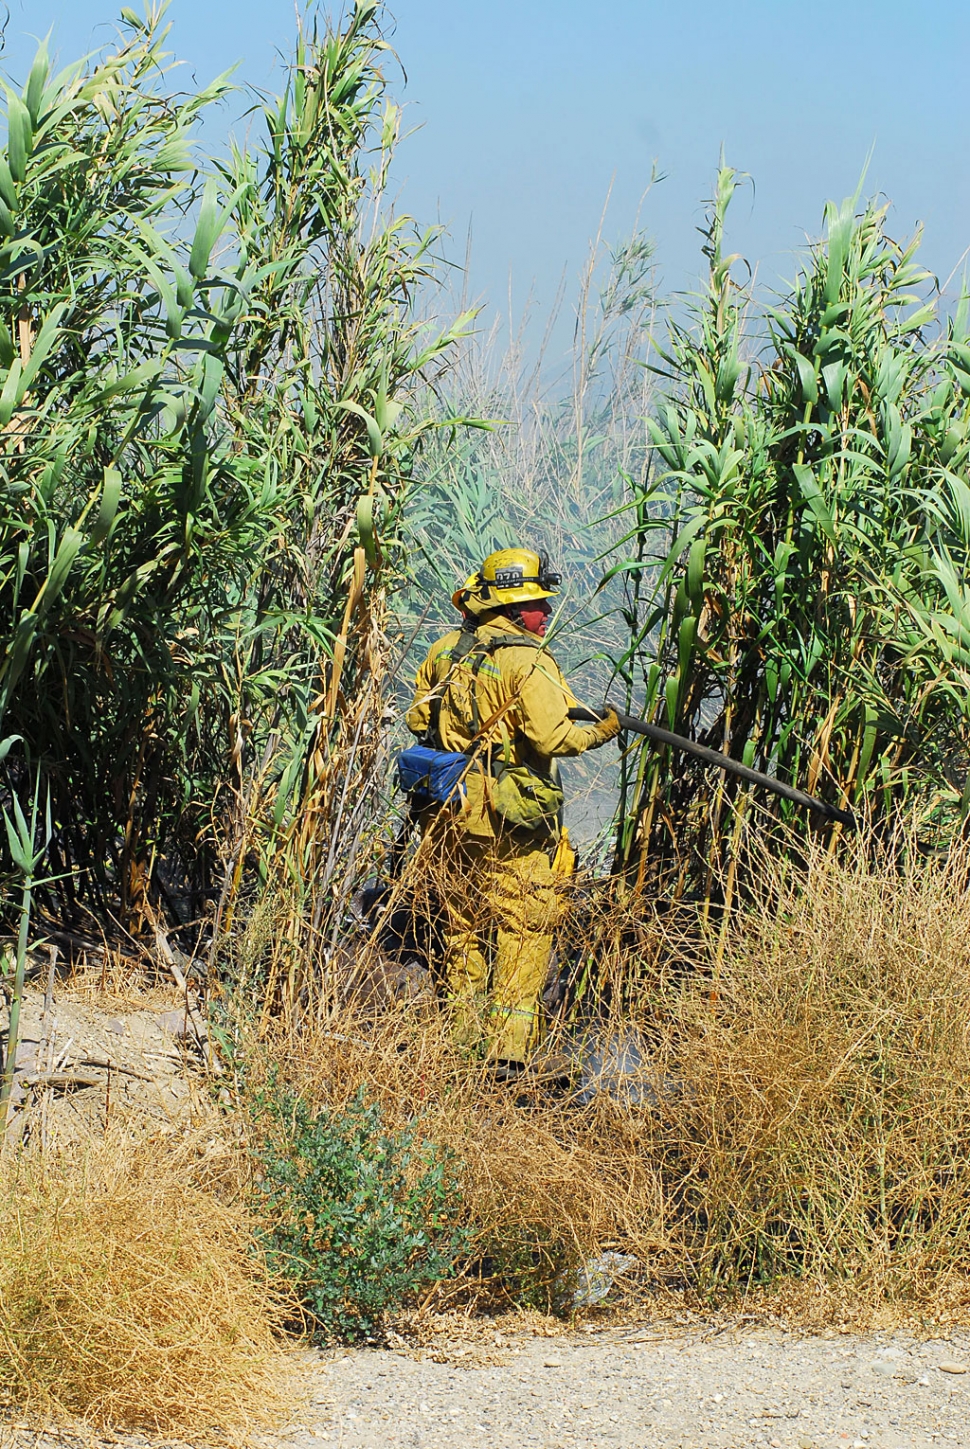 Thursday afternoon, about 3:00 p.m., the Fillmore Fire Department responded to a small brush fire in the bamboo-like foliage at the northern end of the Highway 23 bridge. About a quarter acre was involved. Minor traffic congestion resulted for about an hour. A Sheriff’s helicopter was dispatched for a short time. Cause of the fire was not disclosed.